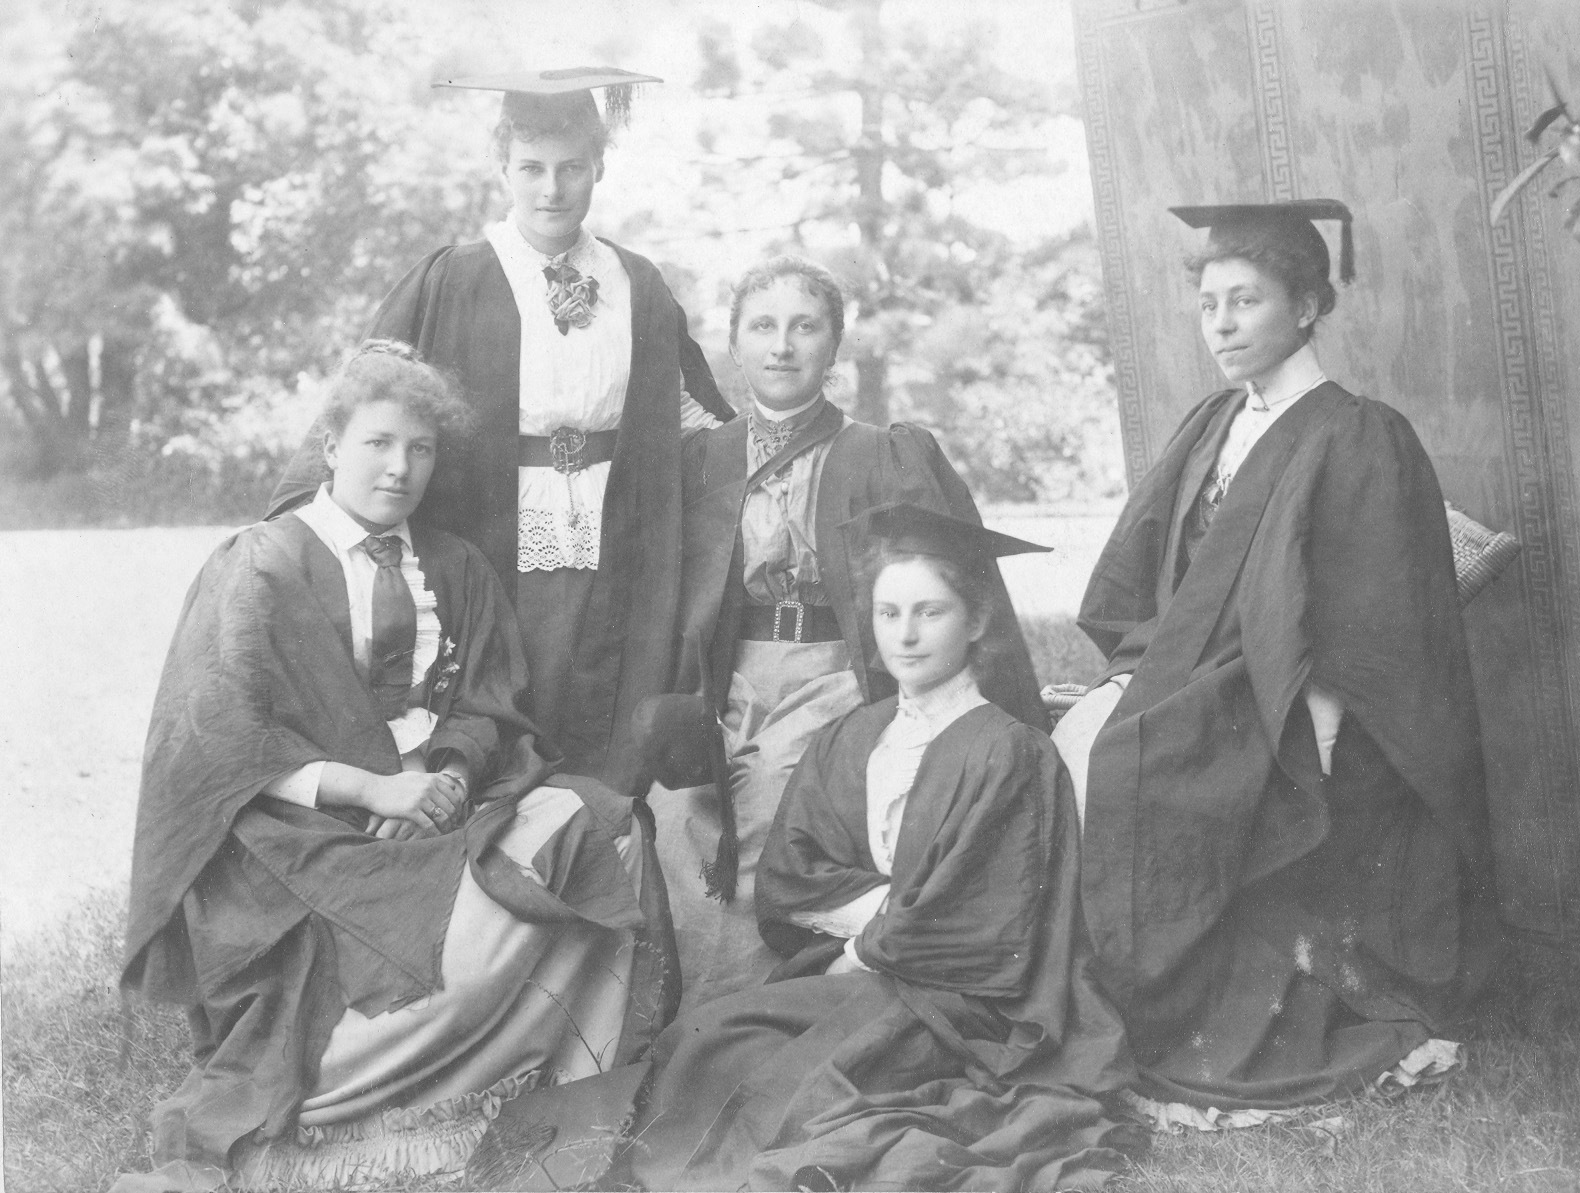 LOUISA MACDONALD AND GROUP OF WOMEN STUDENTS AT WOMEN'S COLLEGE, STRATHMORE AT GLEBE (?)